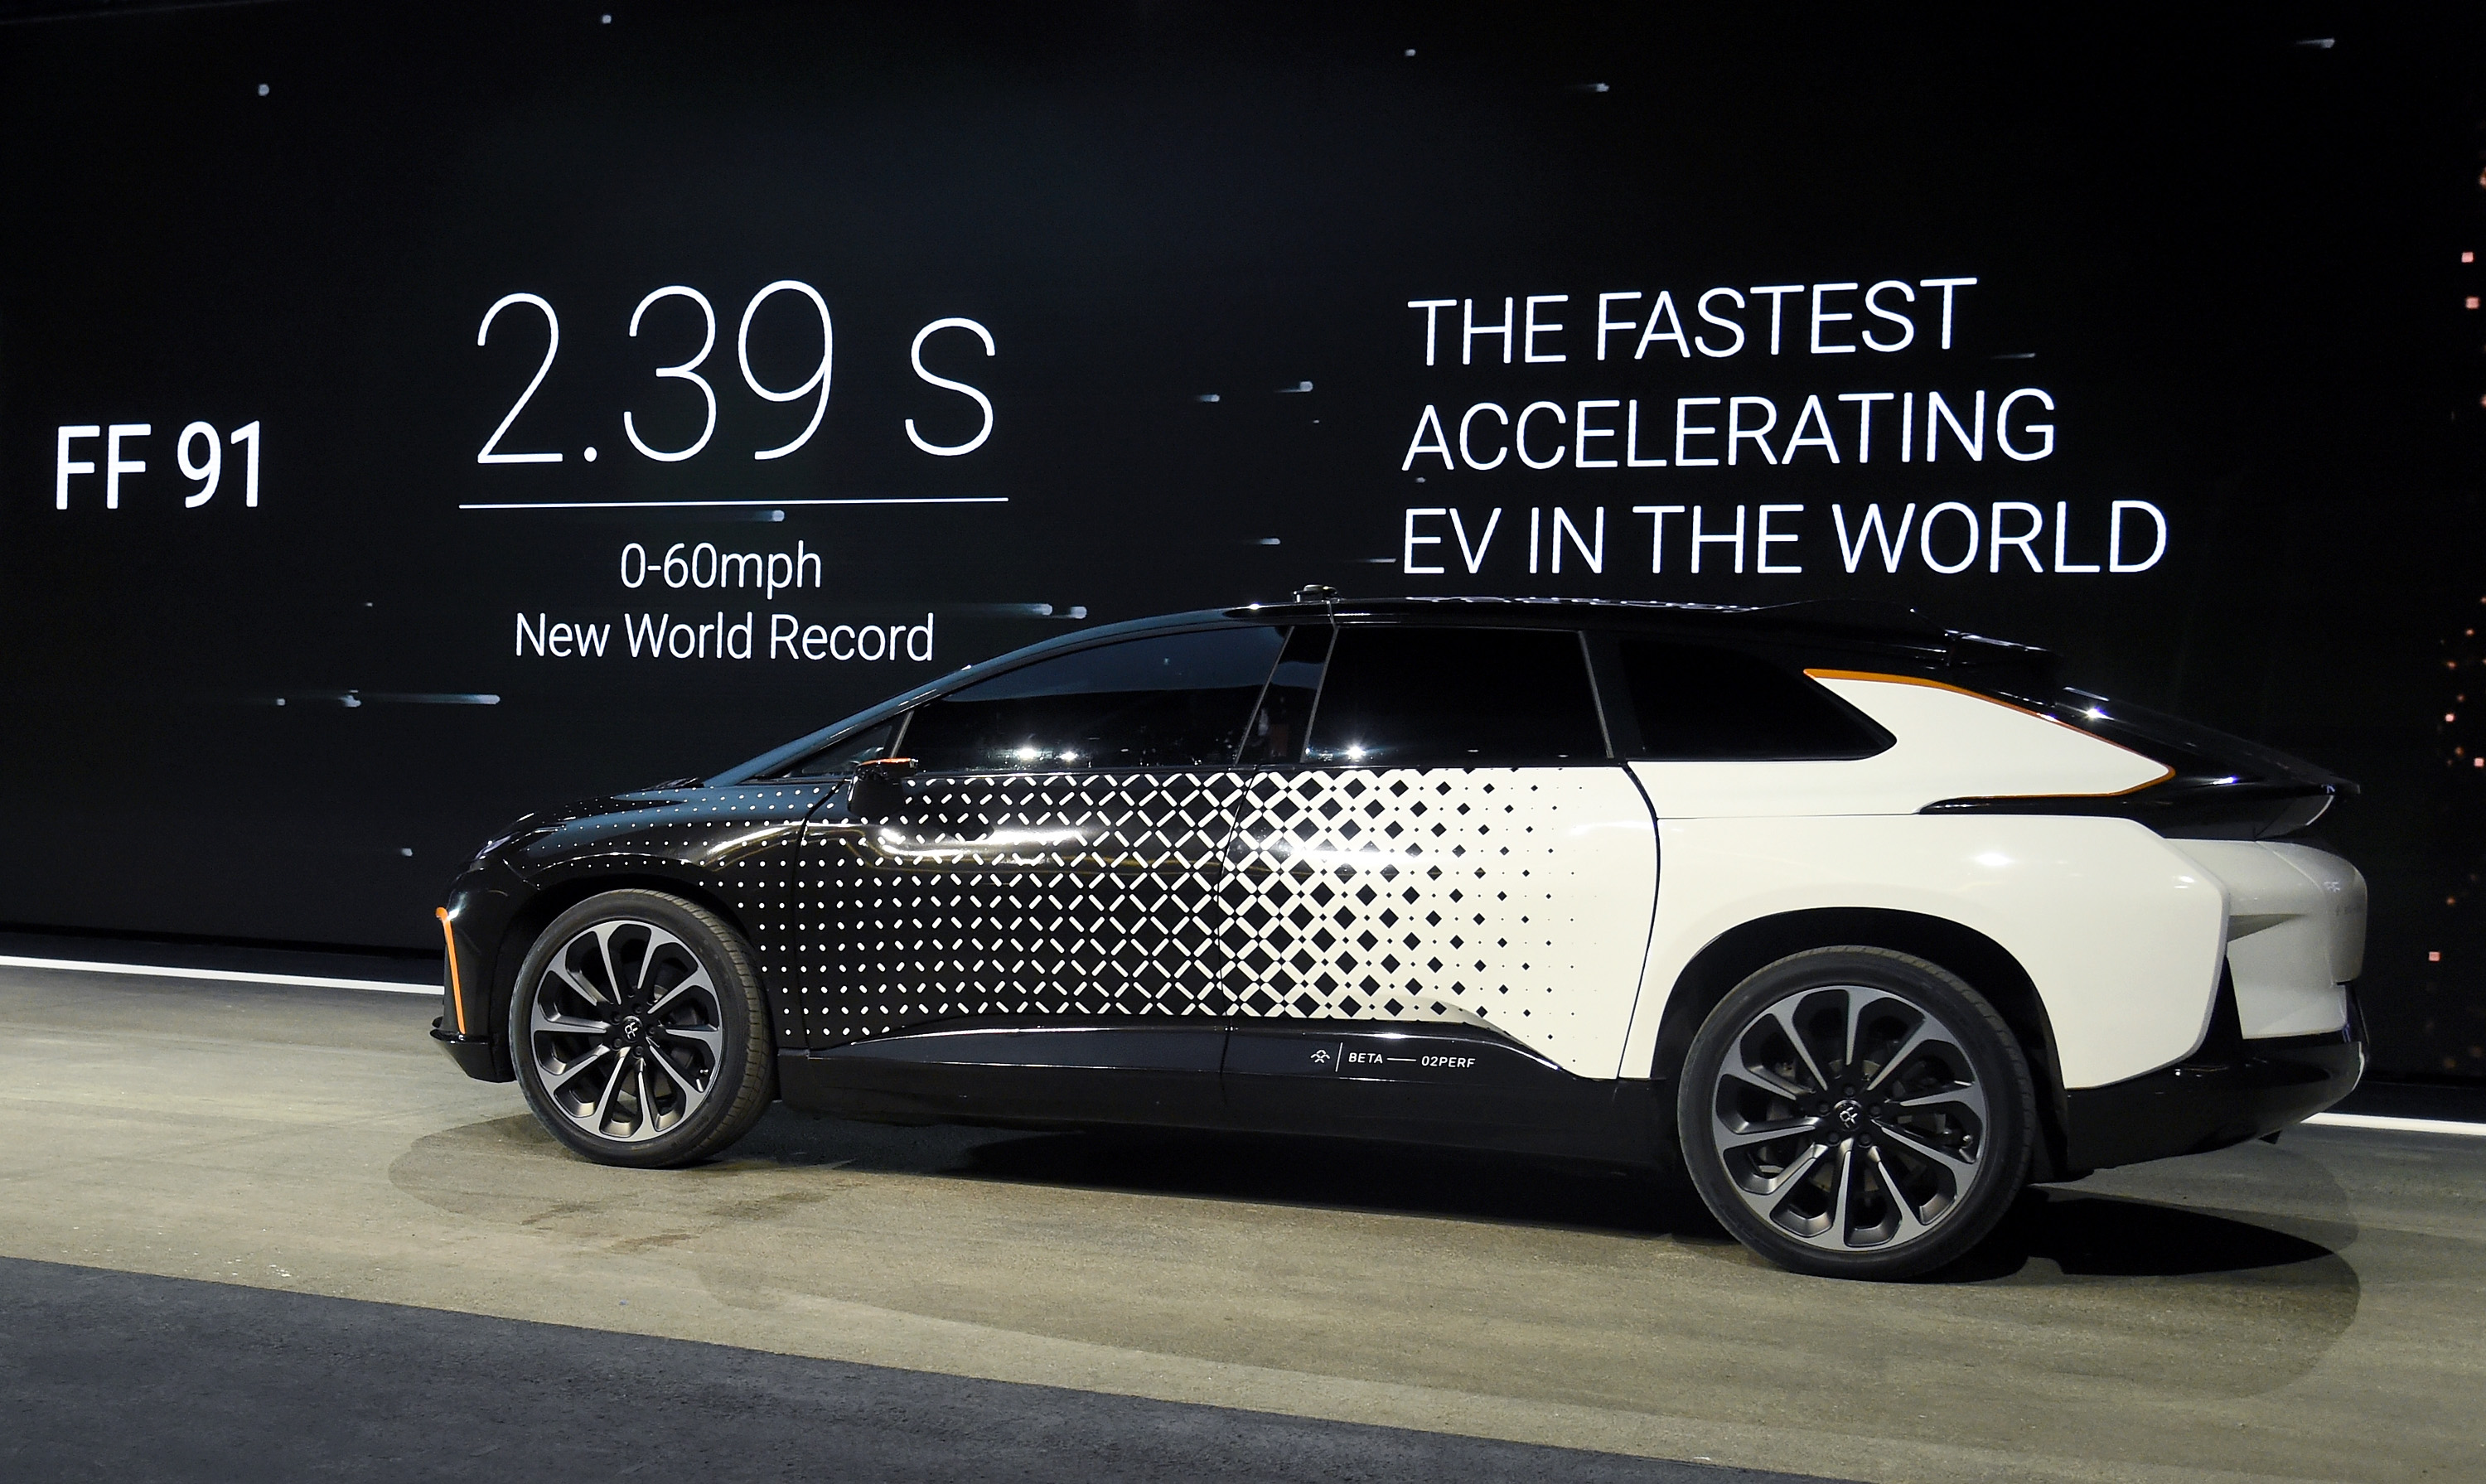 New-energy carmaker Faraday Future has announced it will not build a $1 billion plant north of Las Vegas, Nevada, after all, and is looking for another site. Above, Faraday Future officially released its first mass-produced electrocar at the Consumer Electronics Show in Las Vegas on Jan. 3. Photo: Visual China